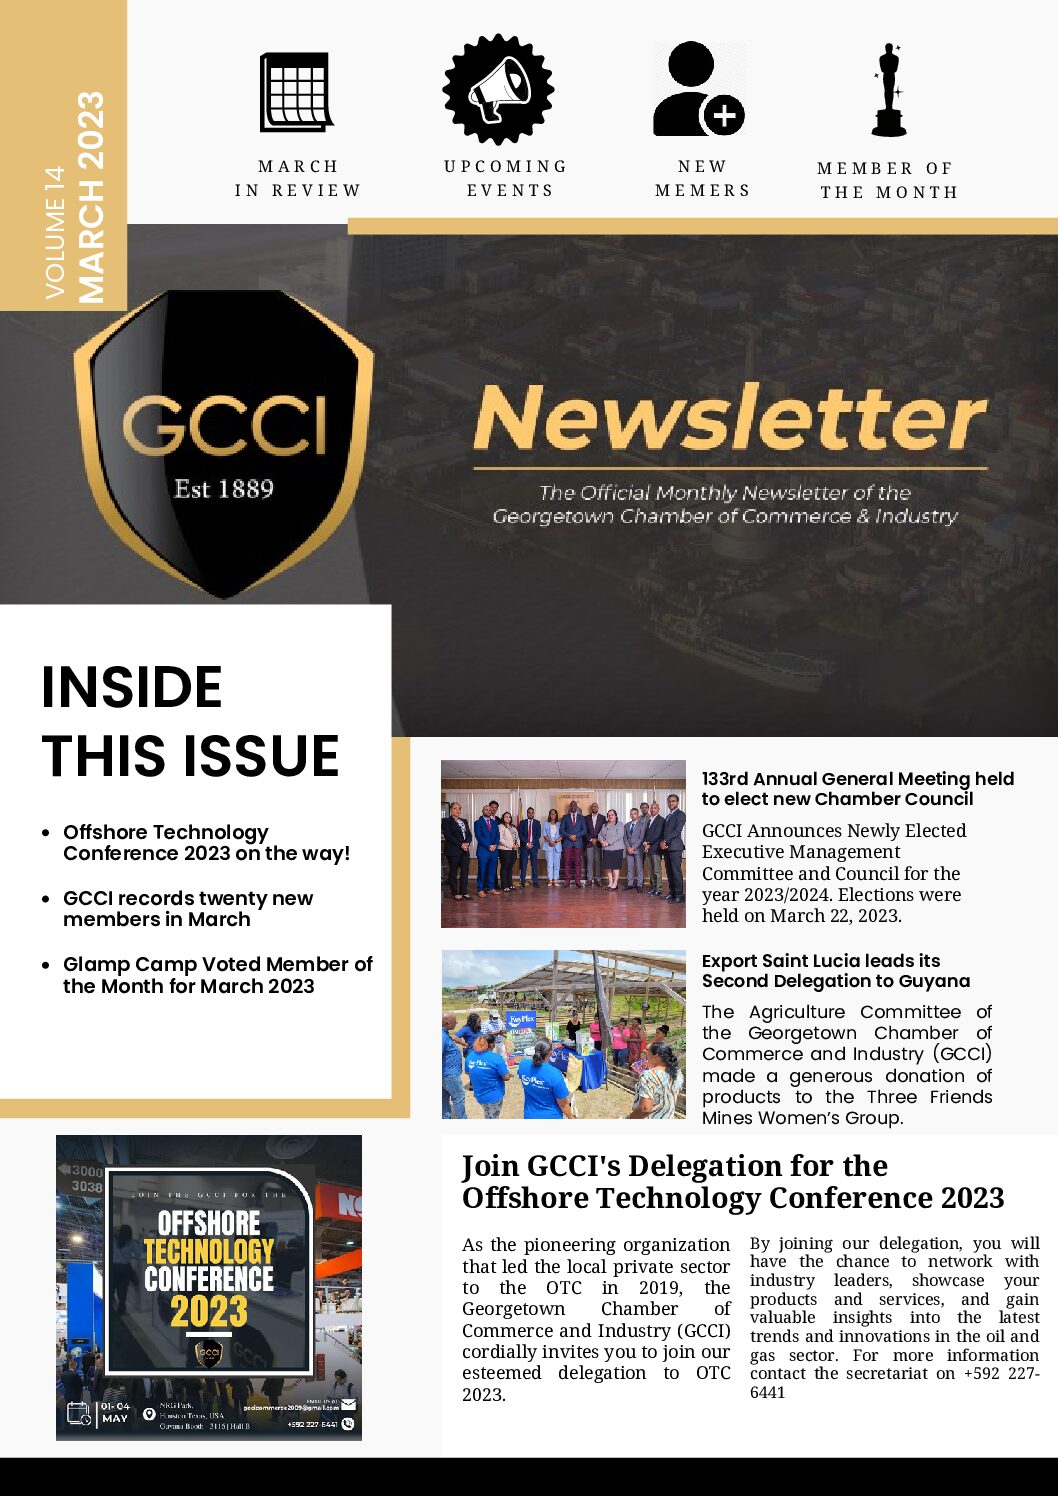 Click the image below to access GCCI’s March 2023 Newsletter March 2023 in Review